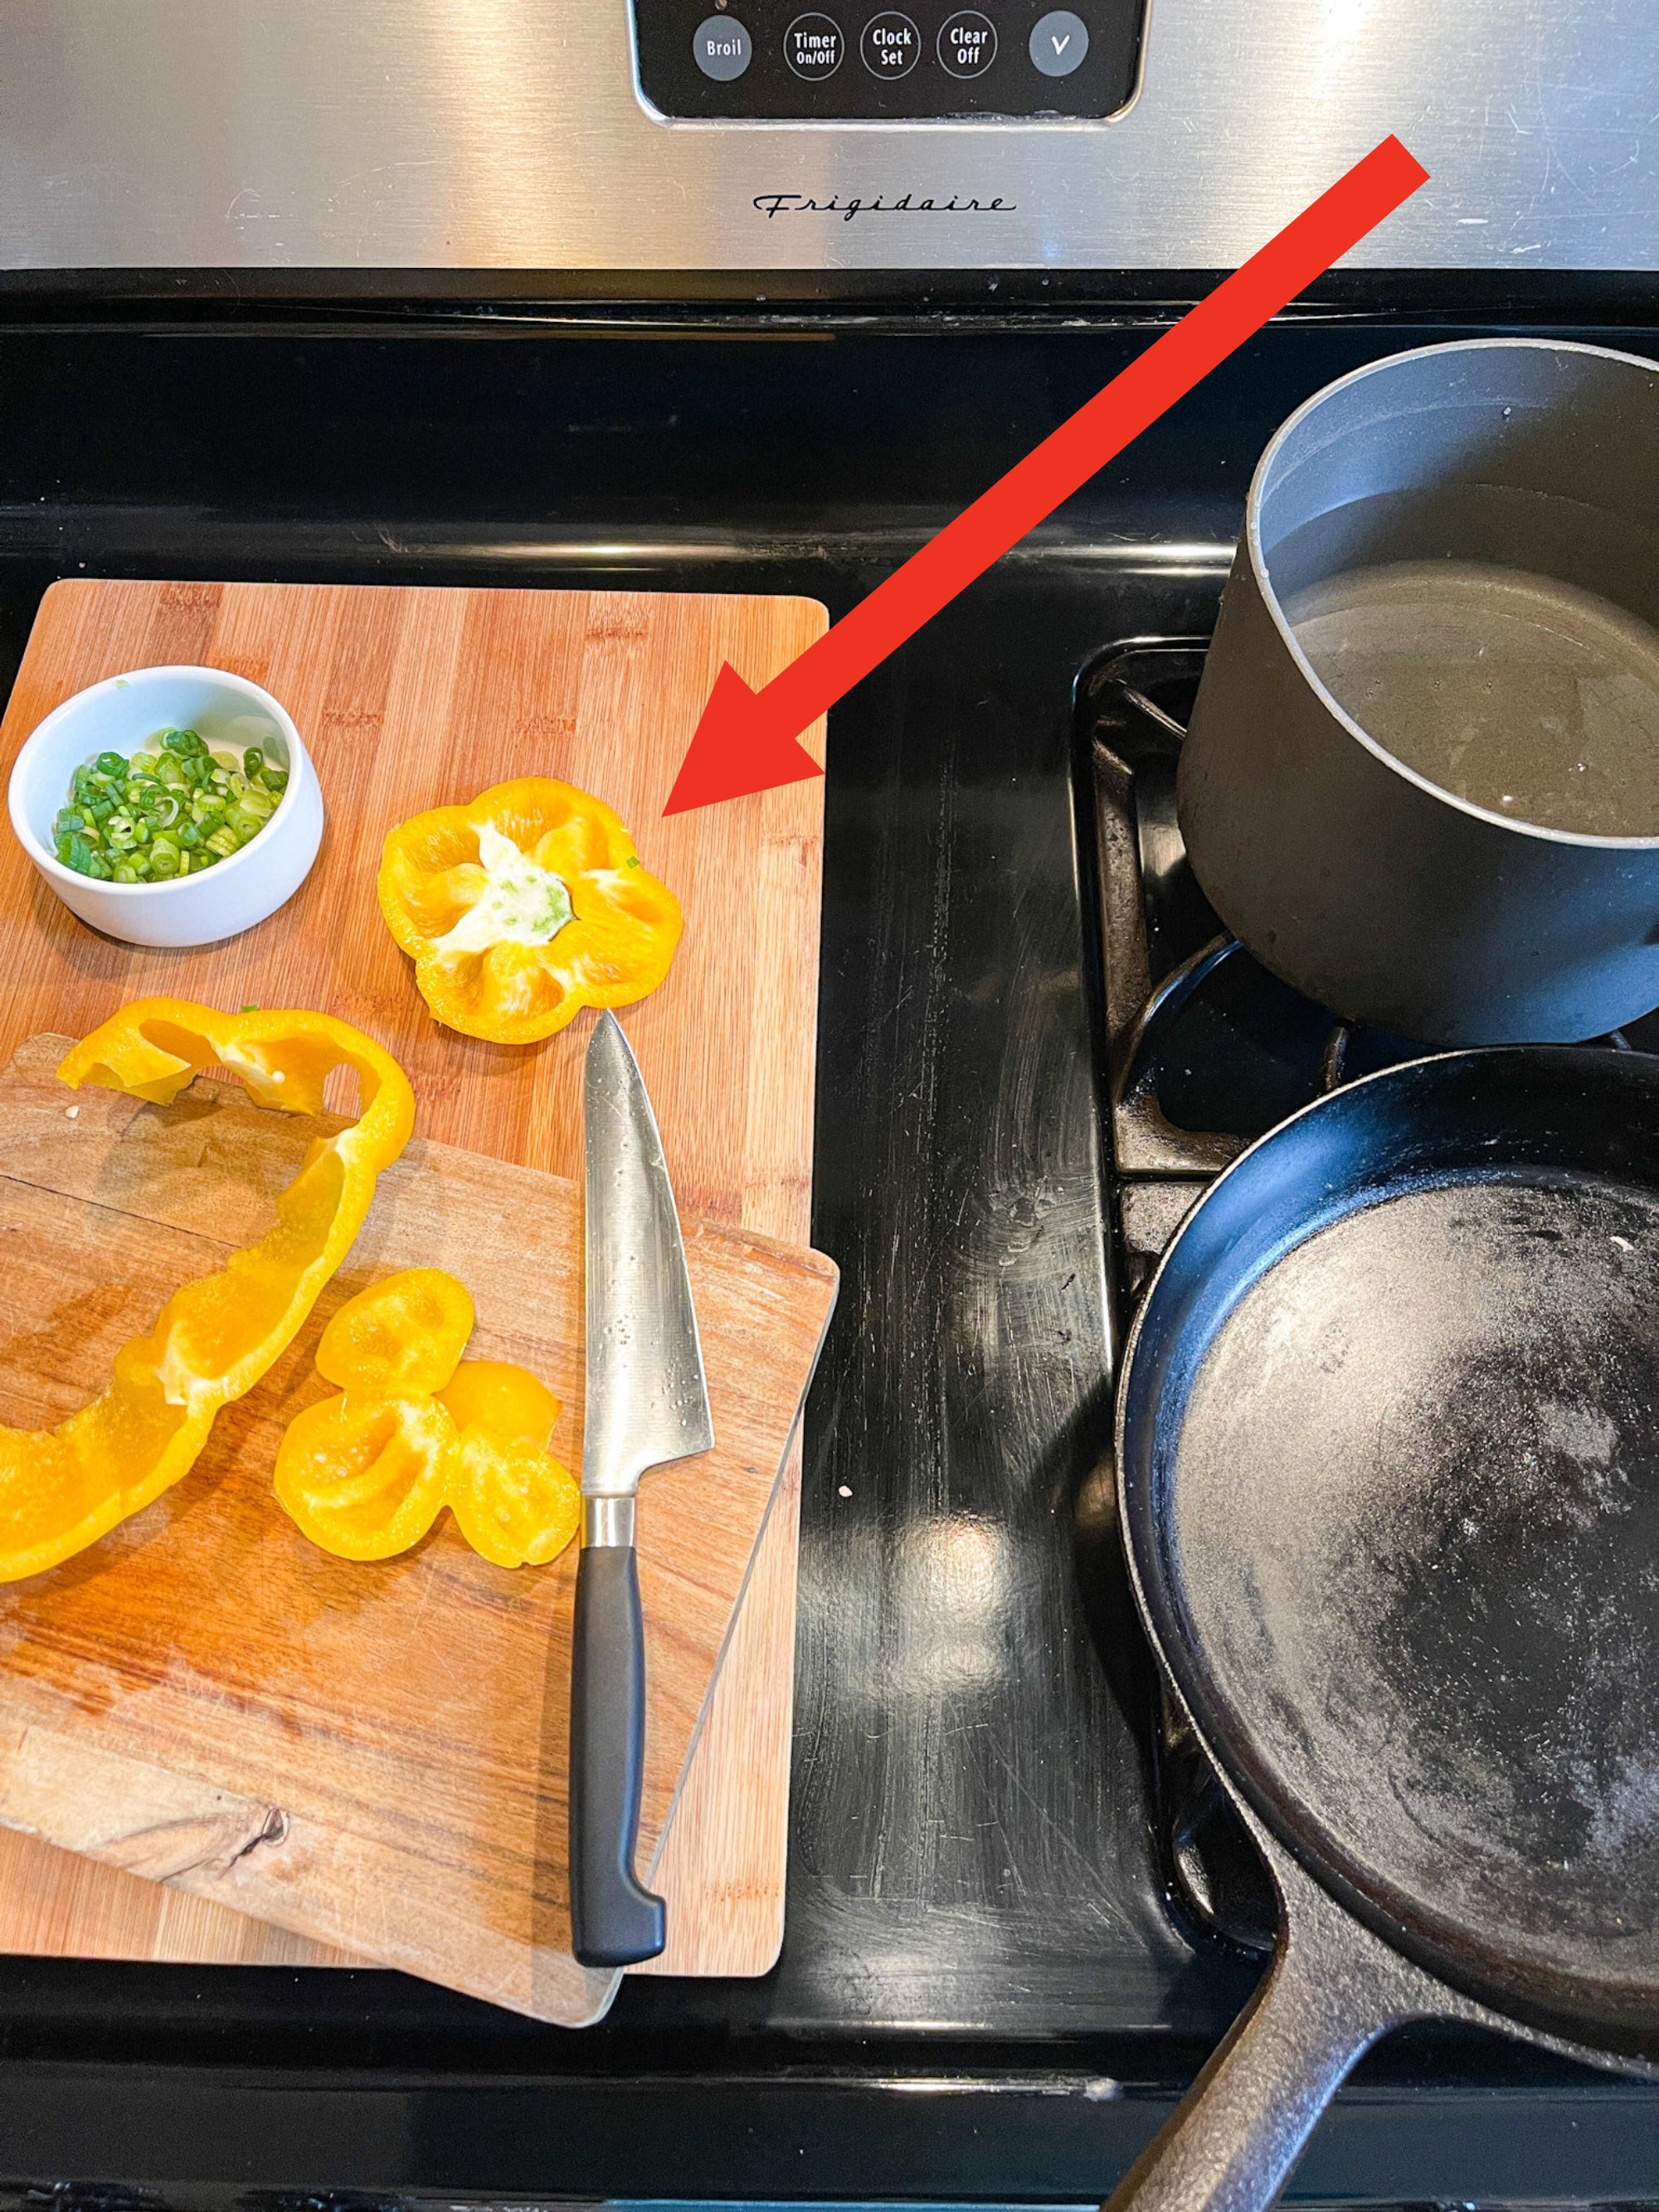 52 Life-Changing Kitchen Tricks For Easier Cooking — Eat This Not That